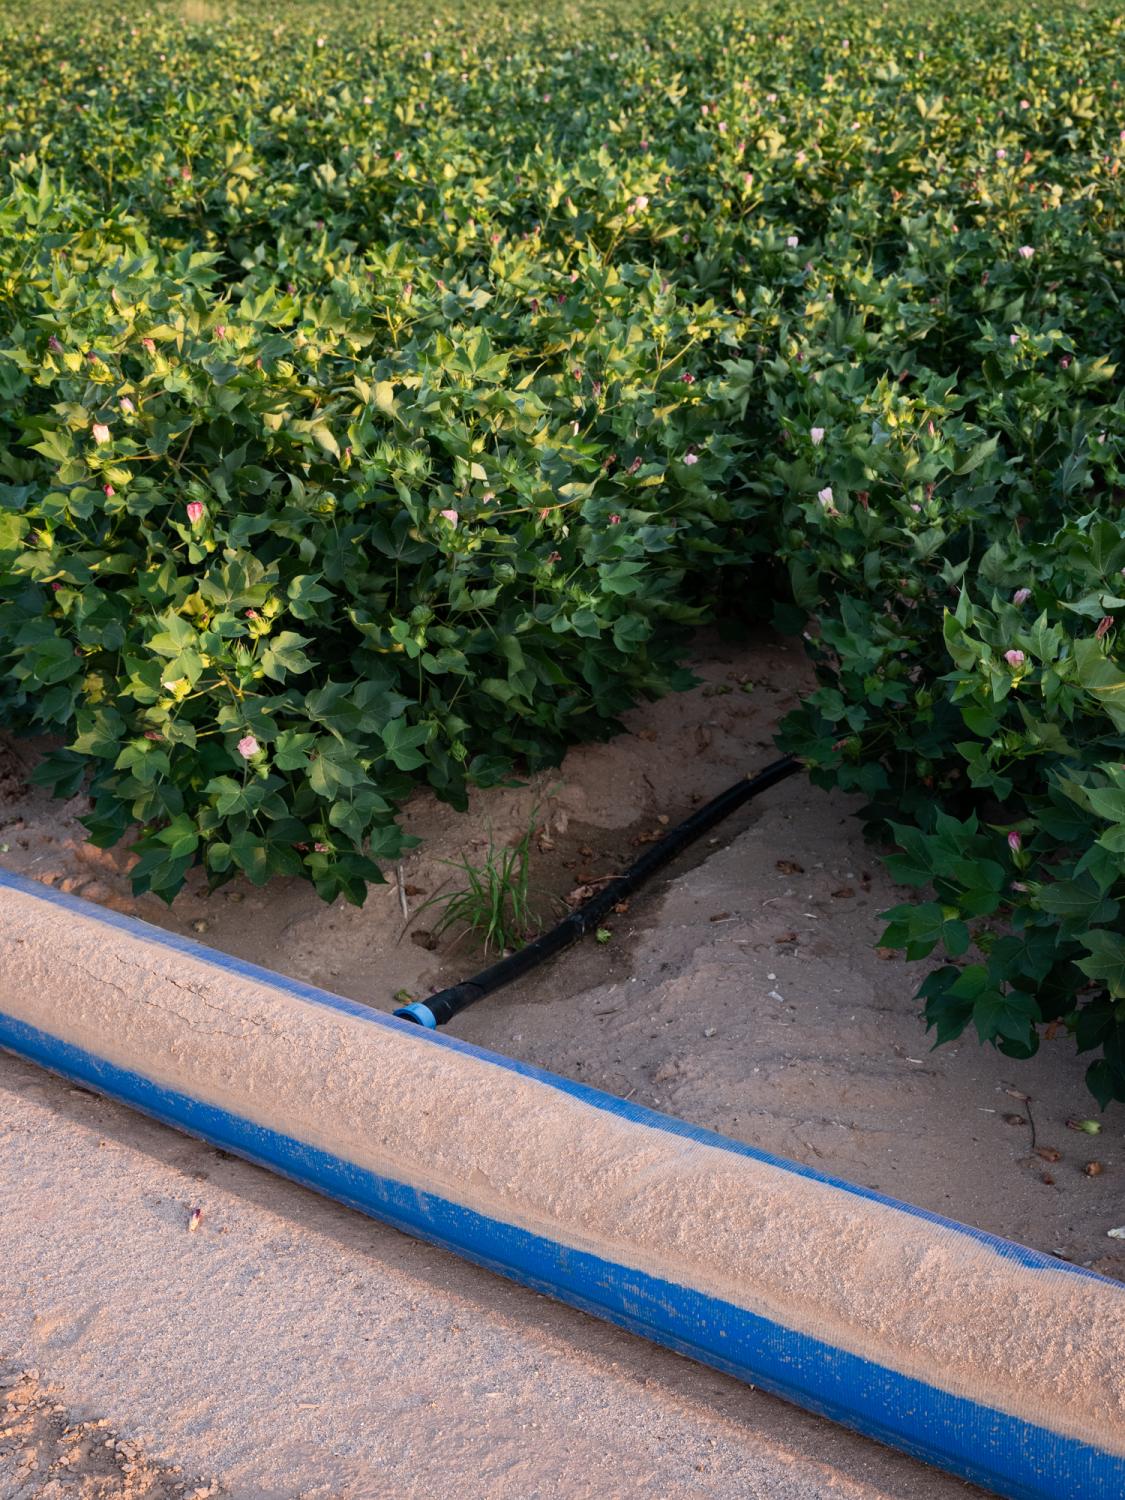 Irrigation Innovation - Bloomberg Businessweek - N-Drip tubes feed water into rows of cotton.